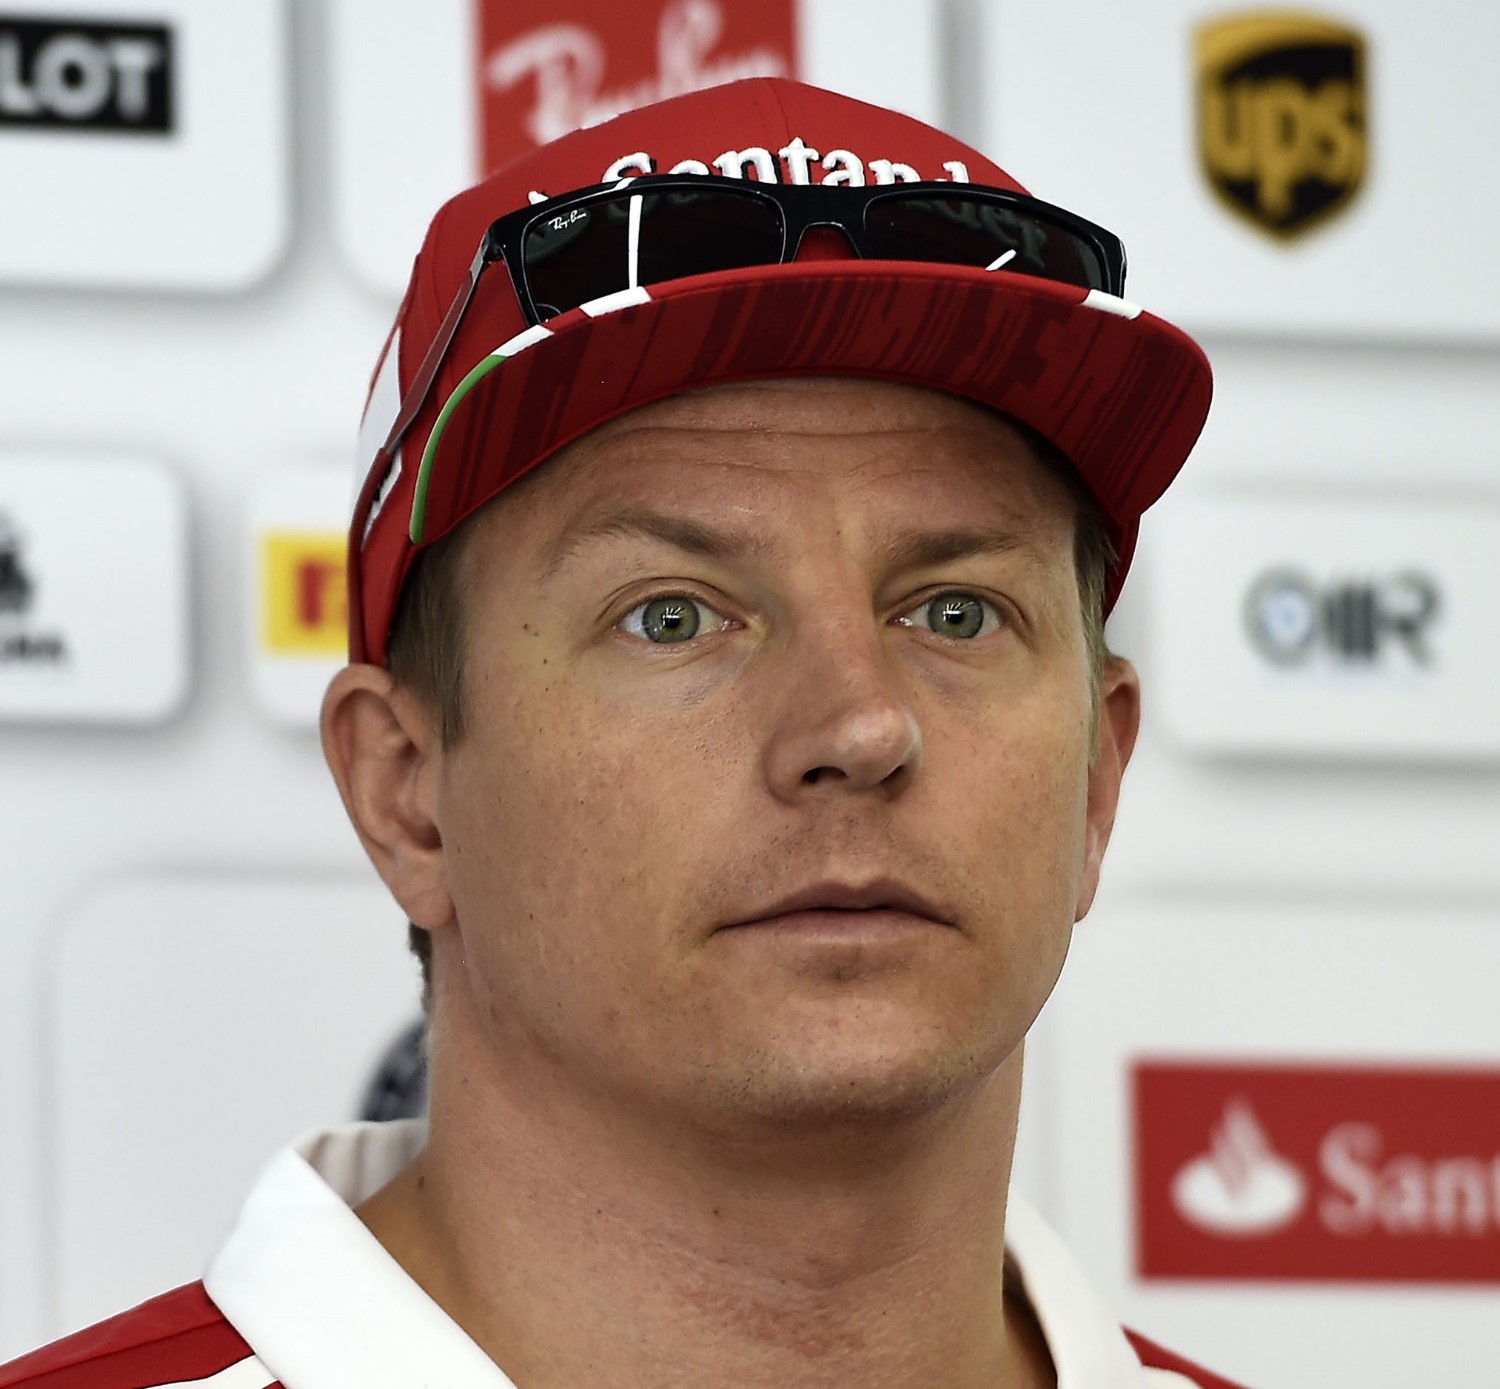 Raikkonen sees clearly now that the Aldo Costa designed Mercedes is superior to his Ferrari